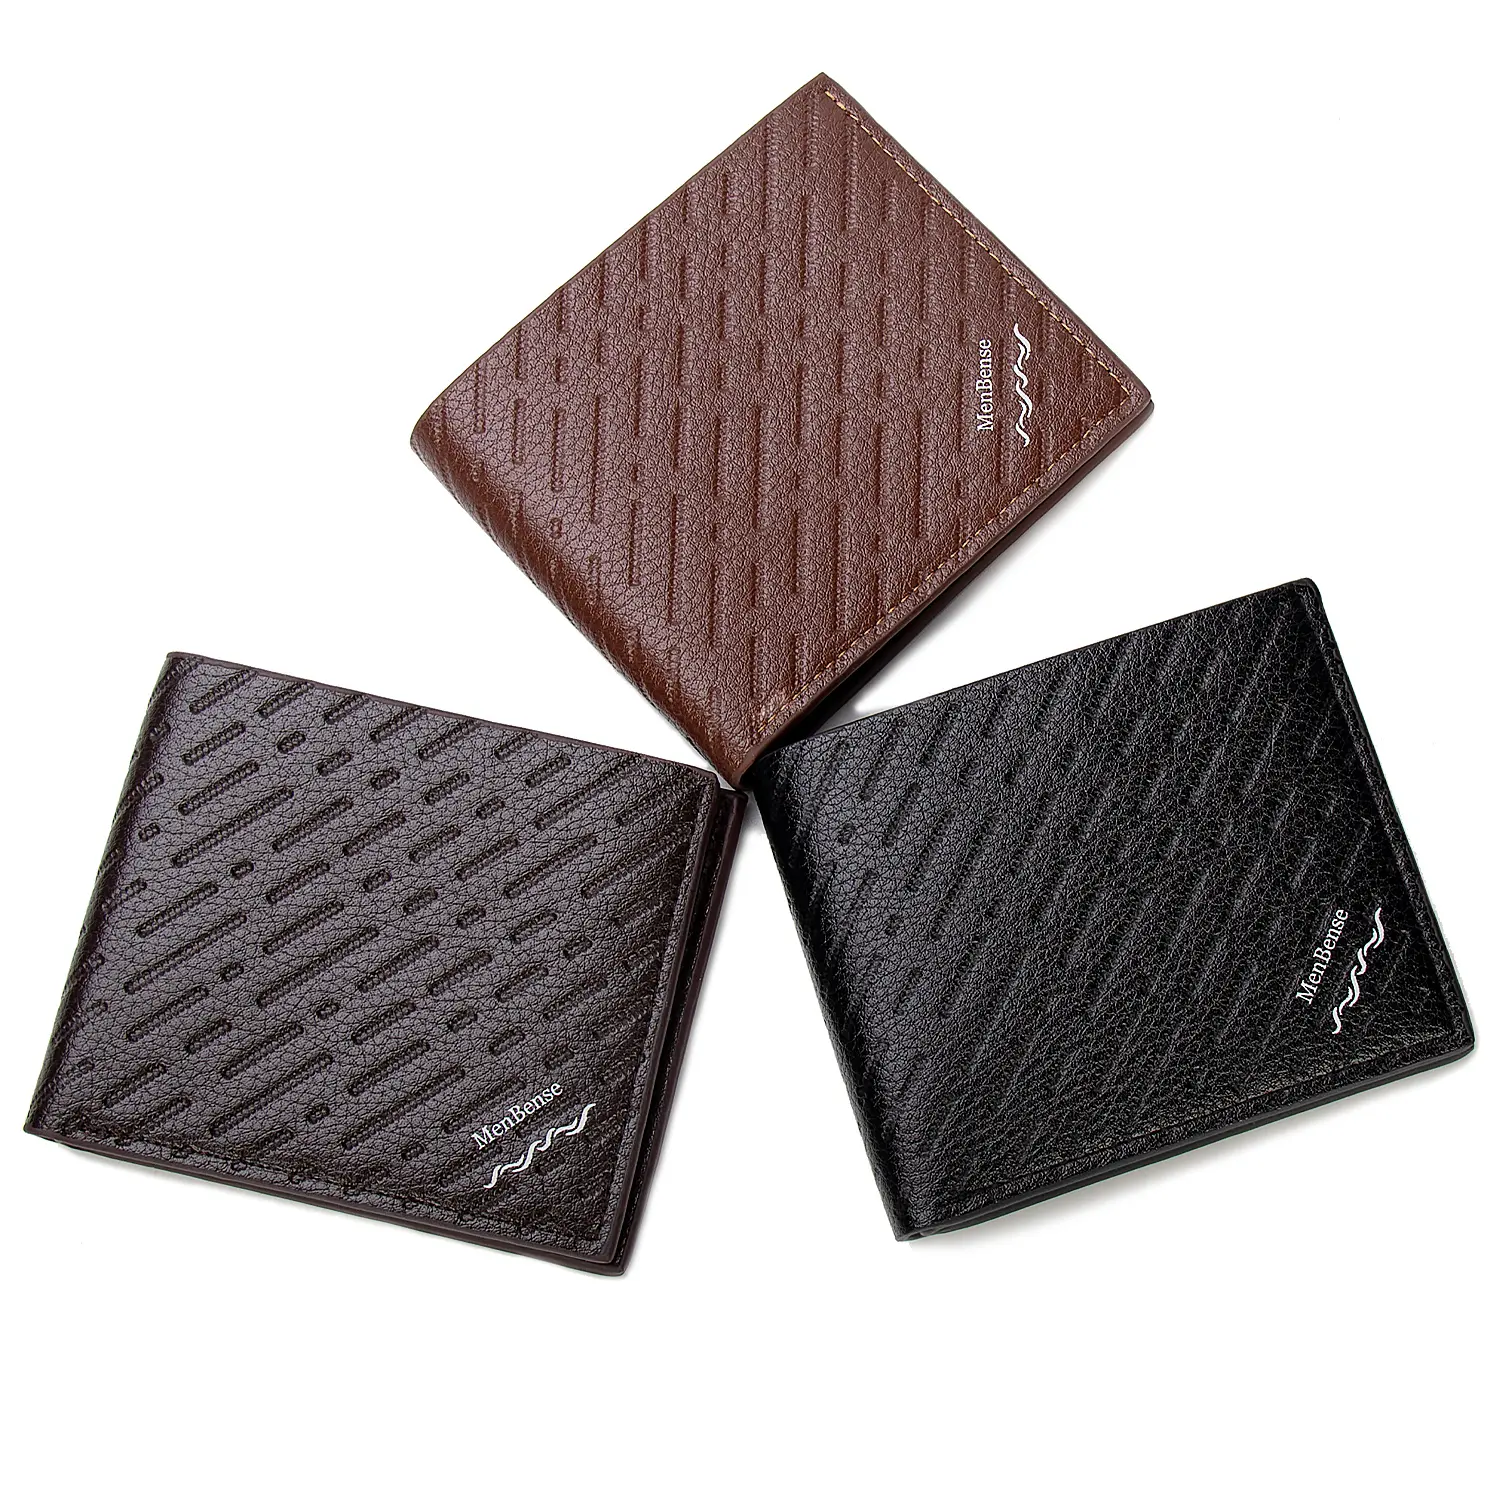 Men's Wallet Short Casual Fashionable Minimalist Thin Wallet with Embossed Logo Wallet Directly Supplied by the Manufacturer